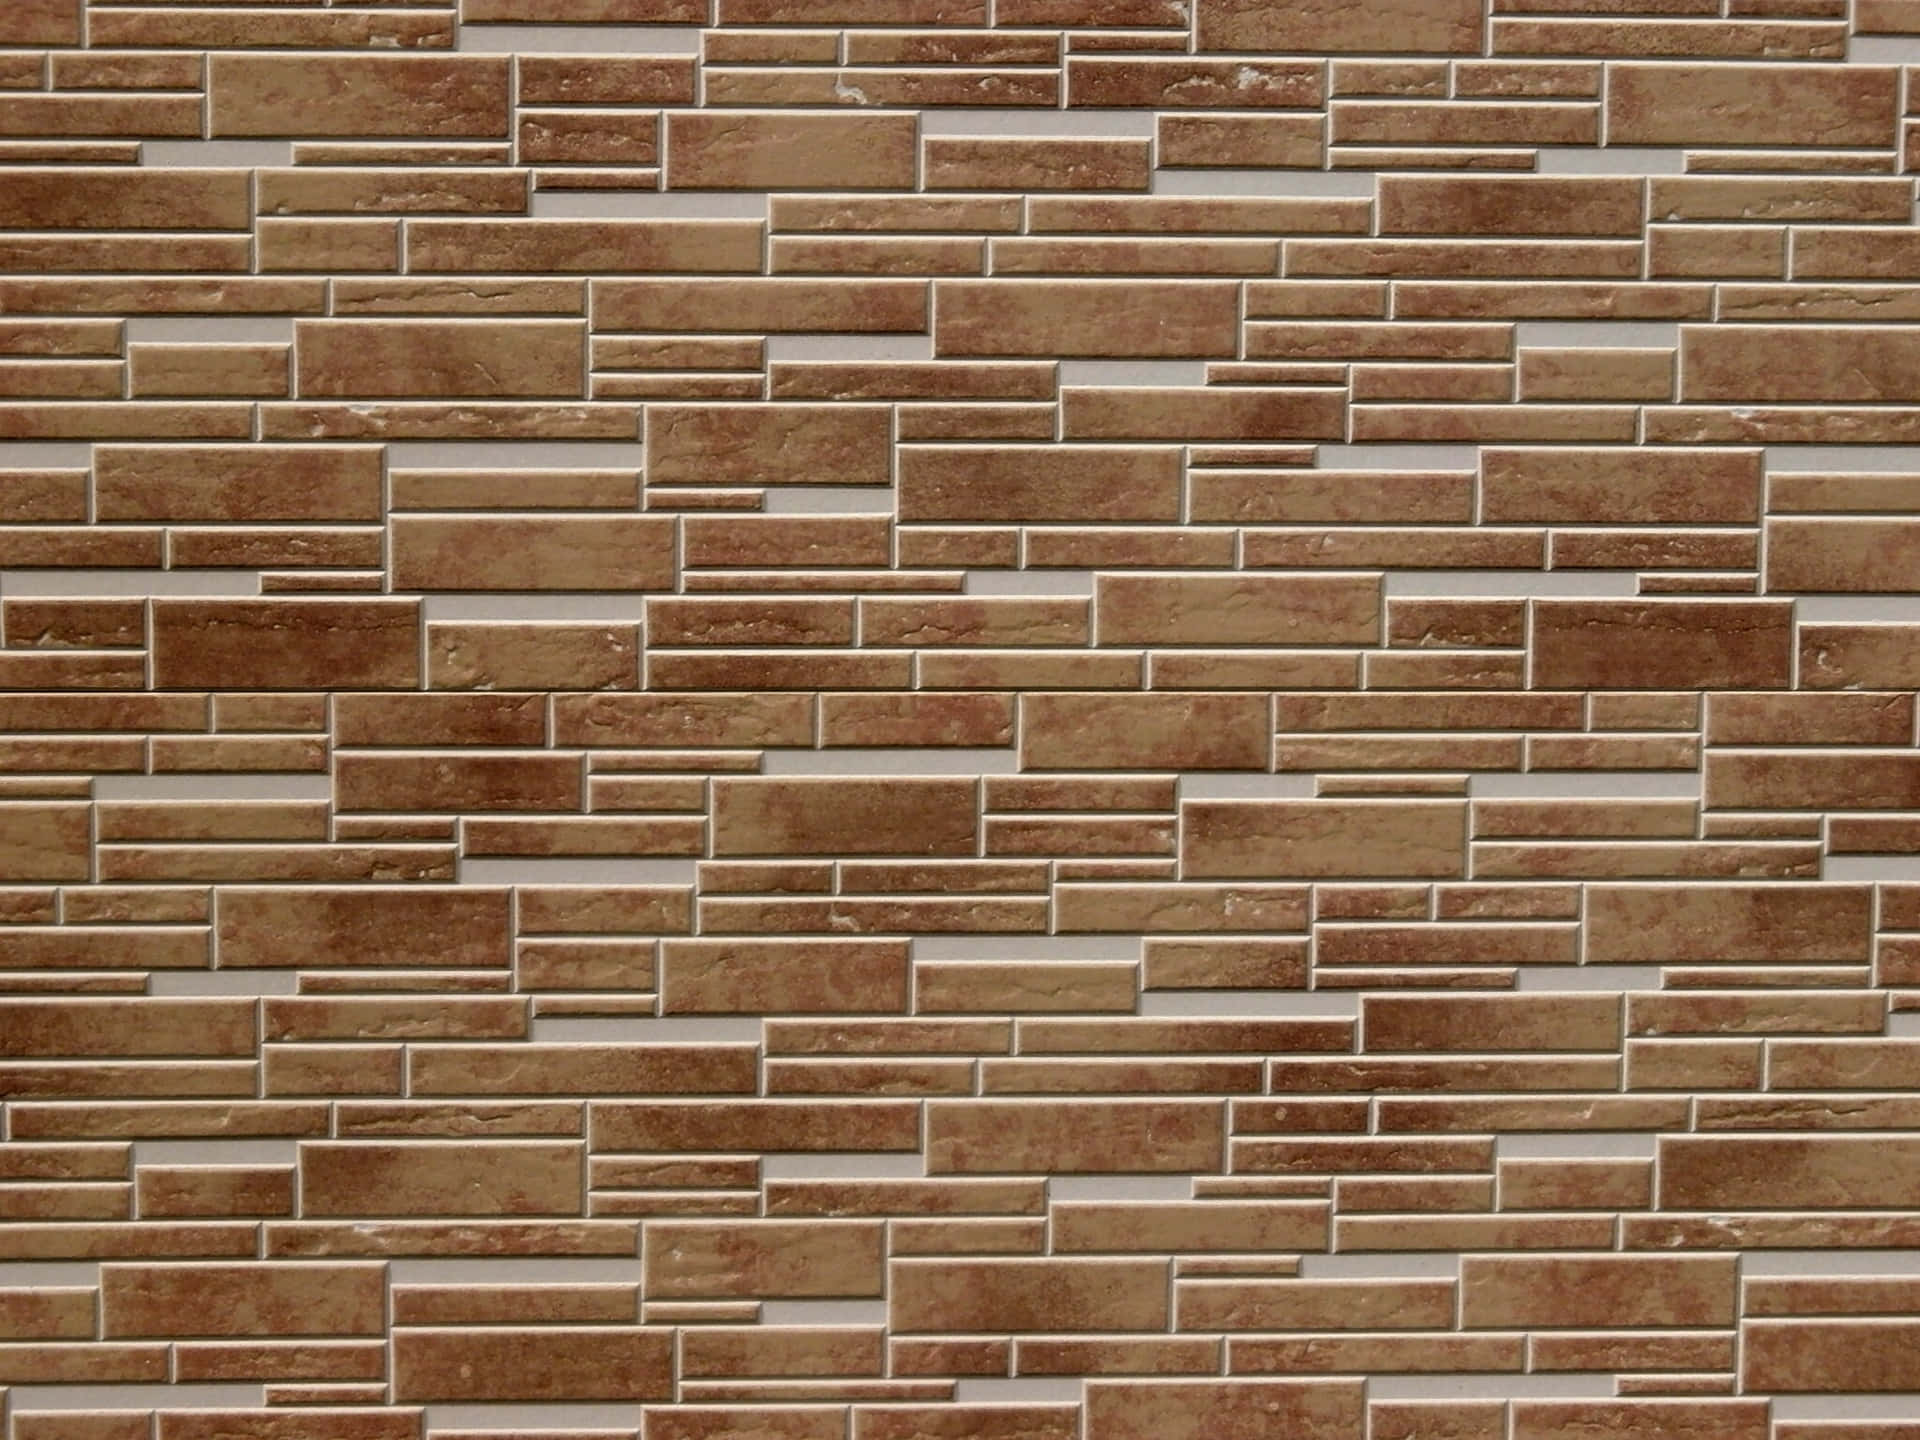 A Close Up Of A Brick Wall With Brown And White Bricks